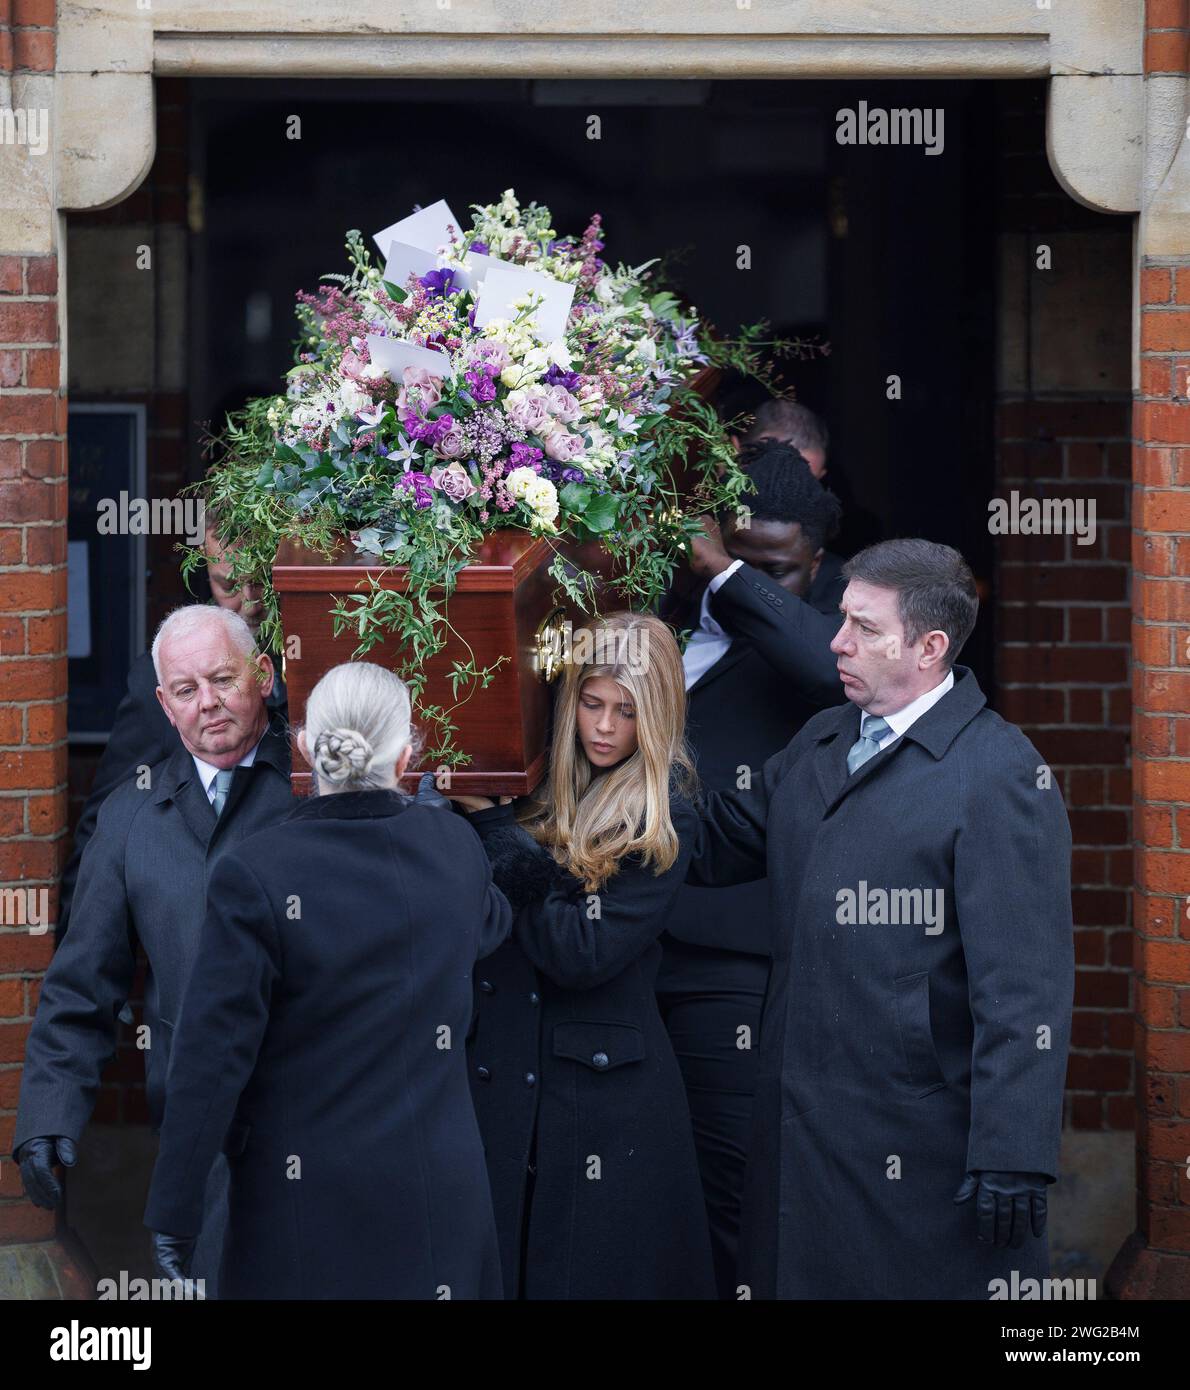 London, UK. 02nd Feb, 2024. Kate Garraway's daughter Darcey, 17, carries the coffin of her father Derek Draper as it leaves The Church of St Mary the Virgin, Primrose Hill in North London following his funeral. Derek Draper, a former political lobbyist and husband of television presenter Kate Garraway, died following a long illness caused by COVI-19 infection. Photo credit: Ben Cawthra/Sipa USA Credit: Sipa USA/Alamy Live News Stock Photo